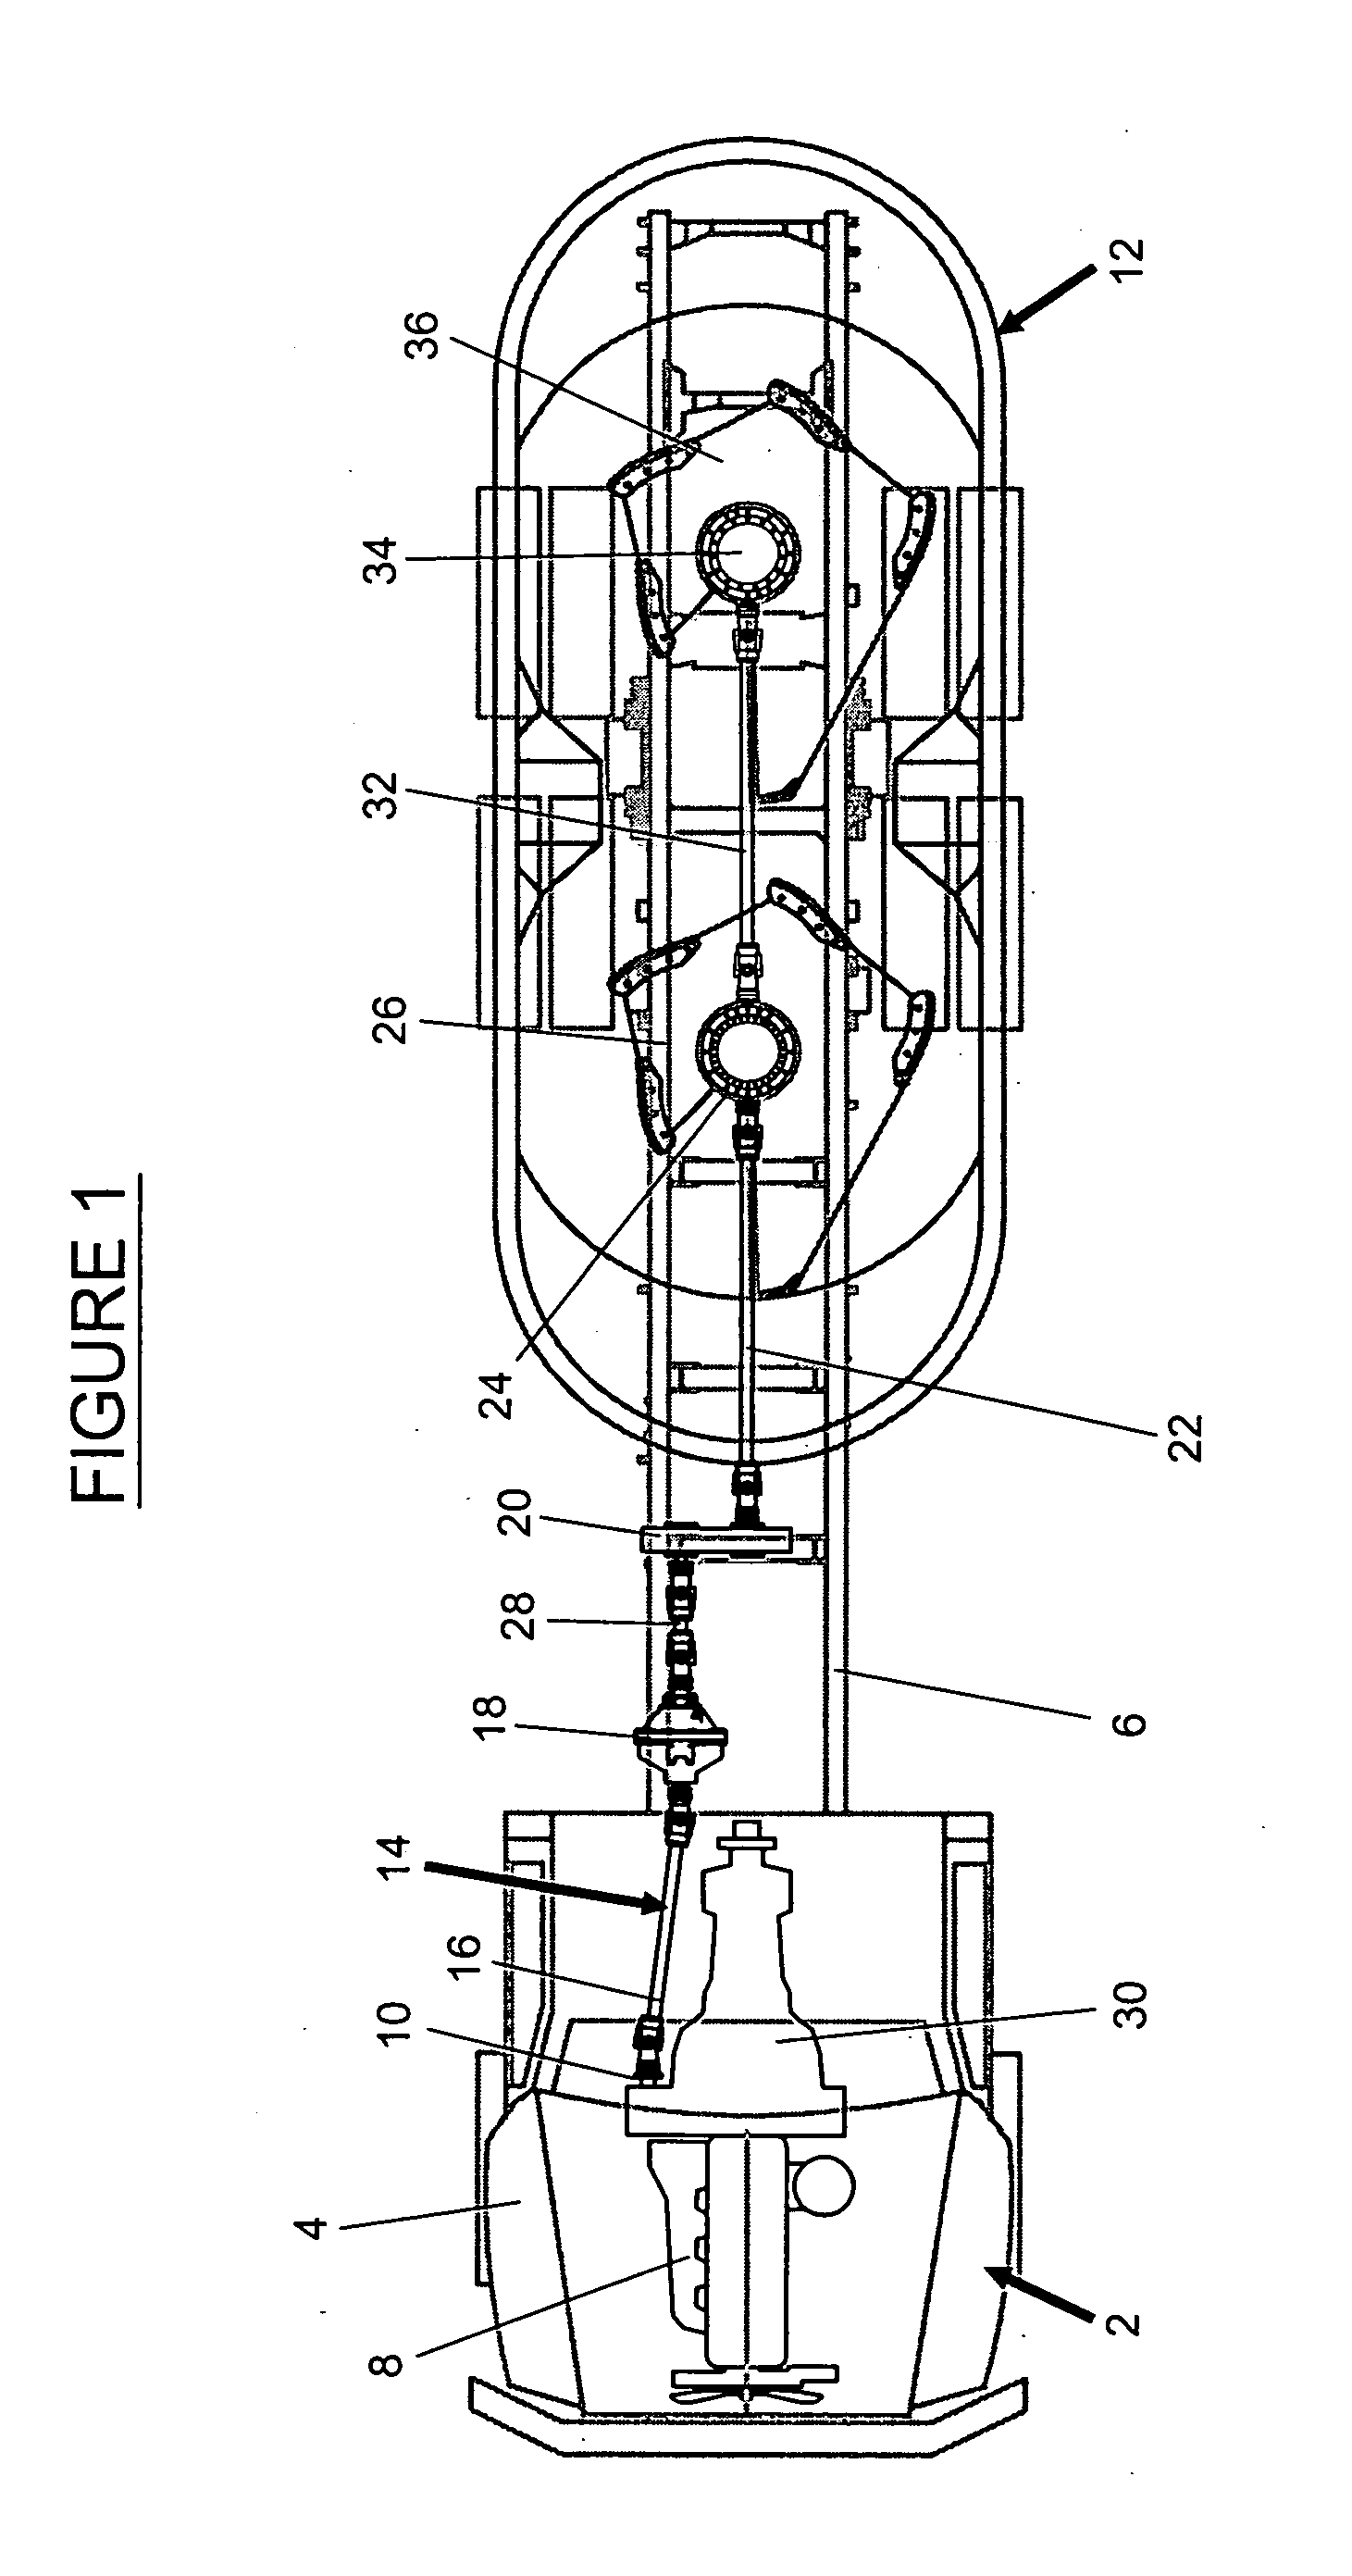 Drive mechanism for a rear engine power takeoff